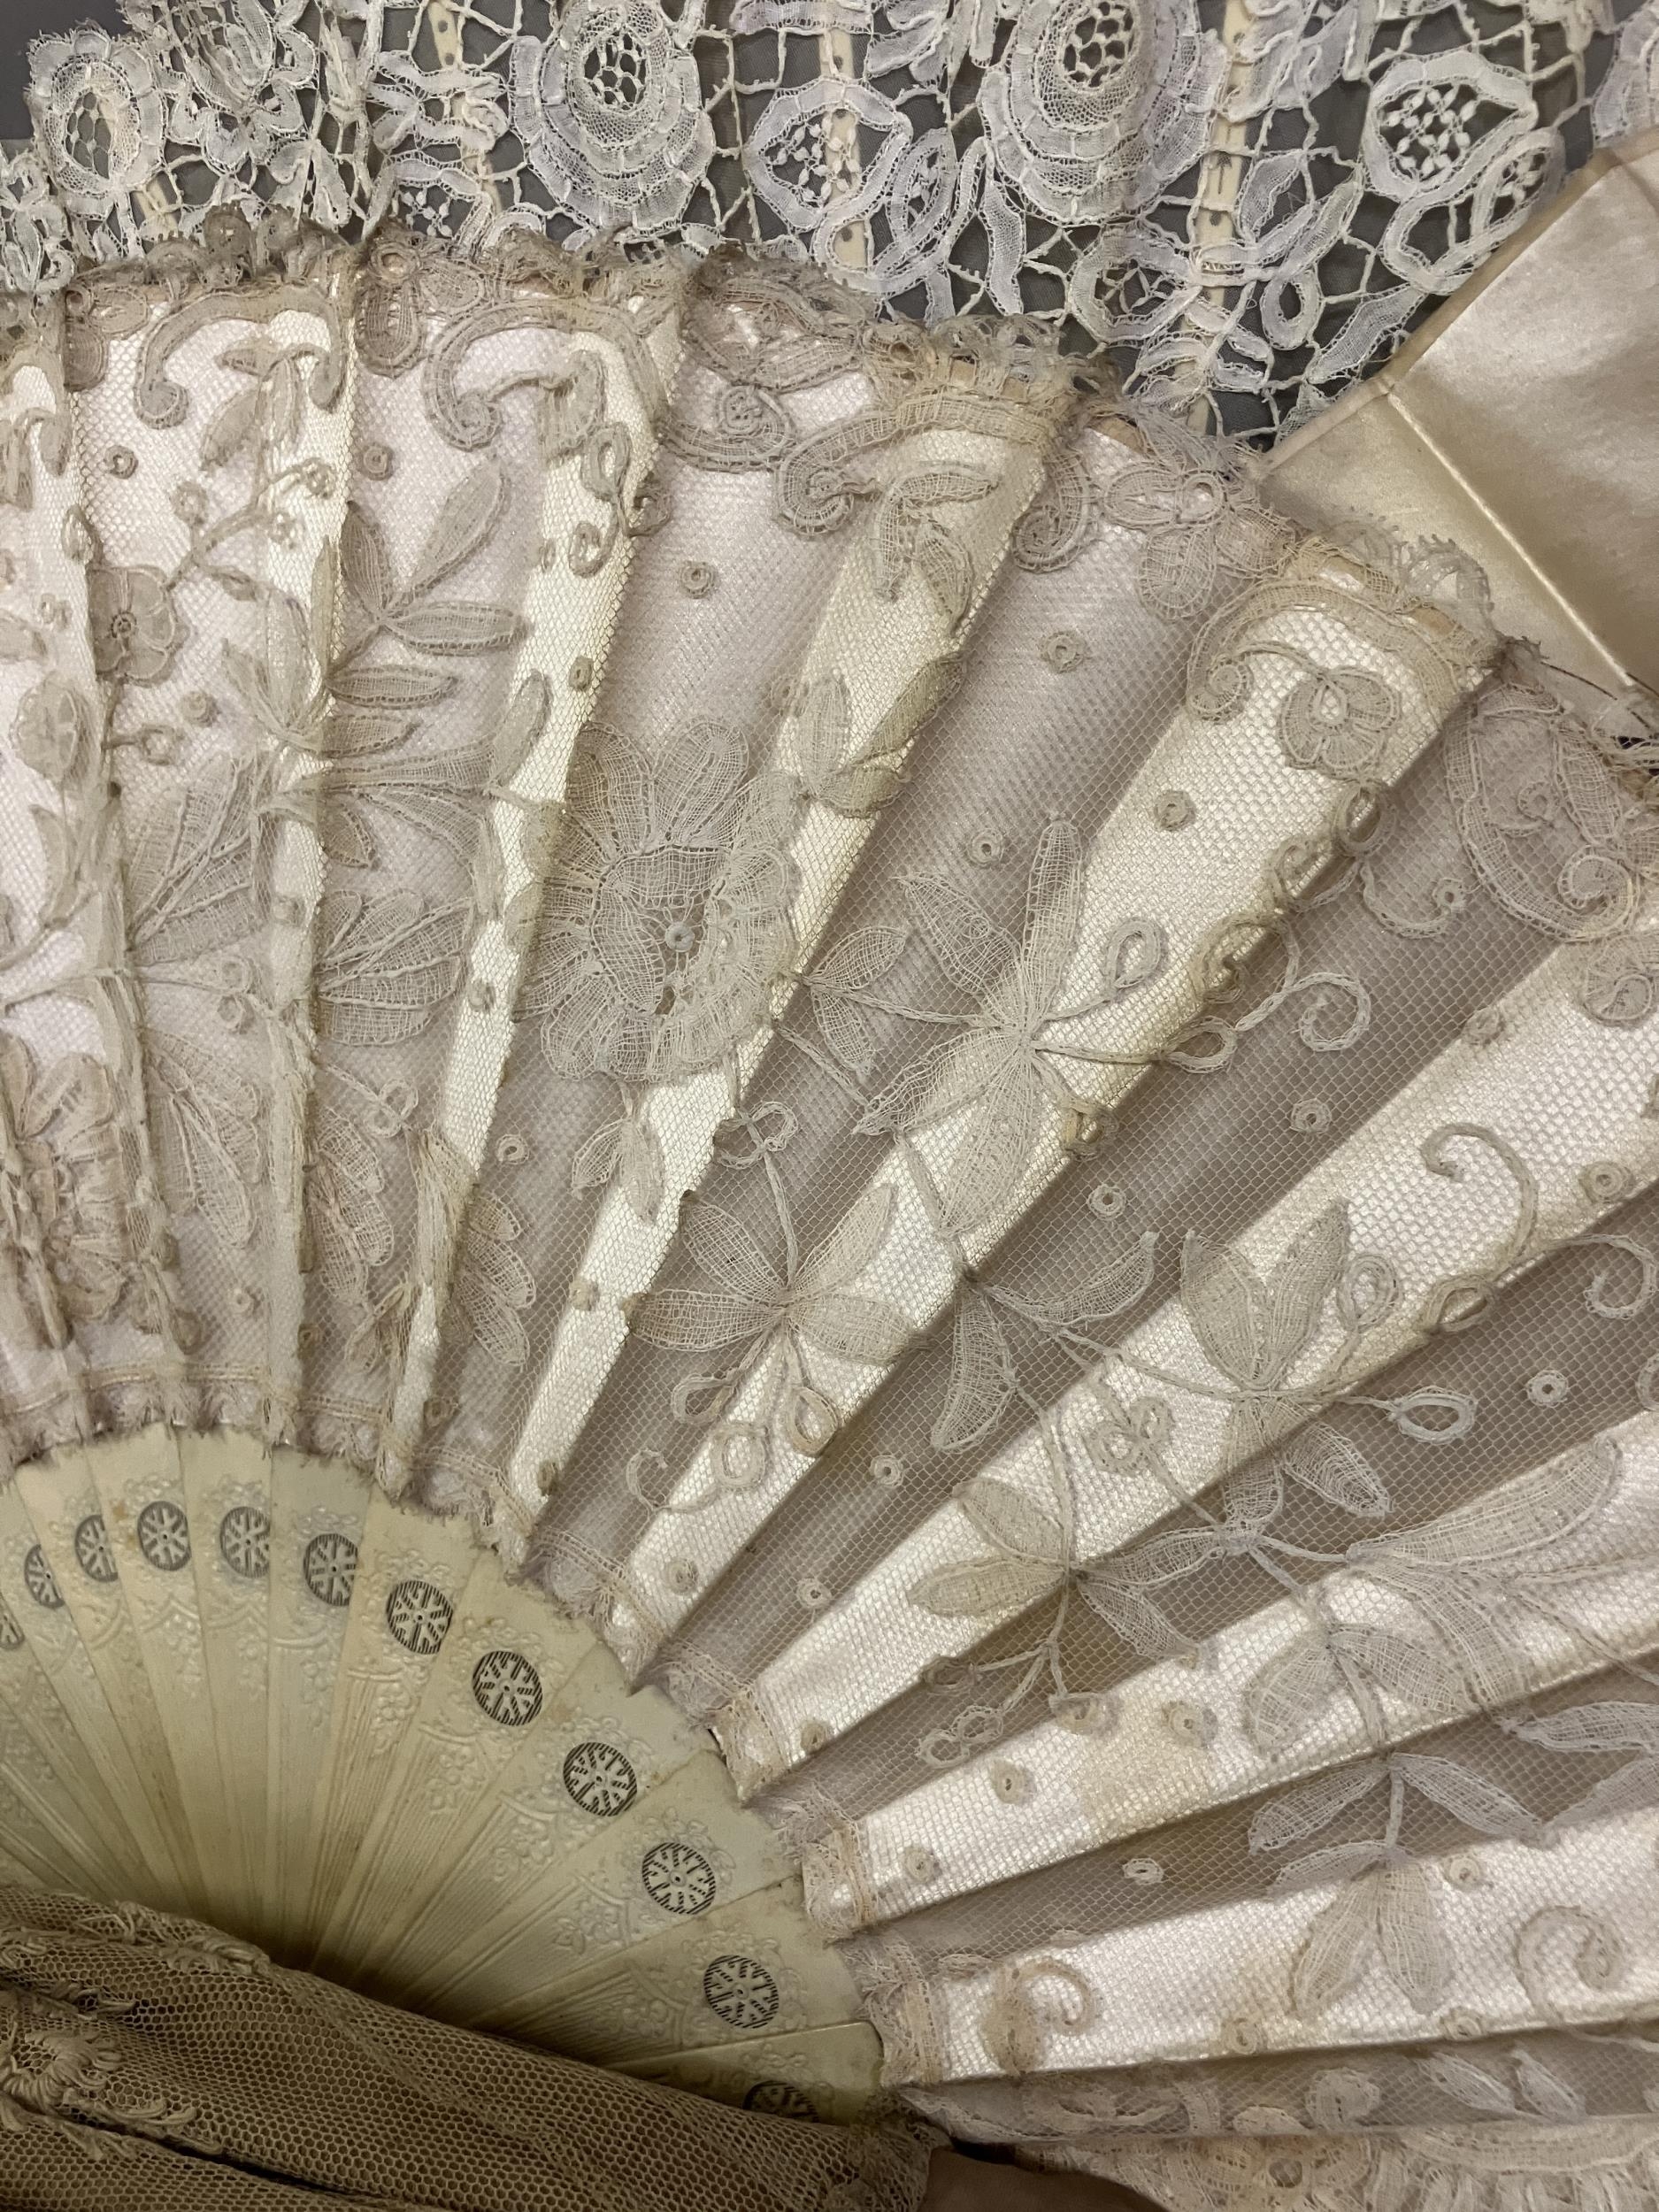 Fans and accessories, late 19th century to early 20th century: Four fans, the first with cream - Bild 2 aus 3